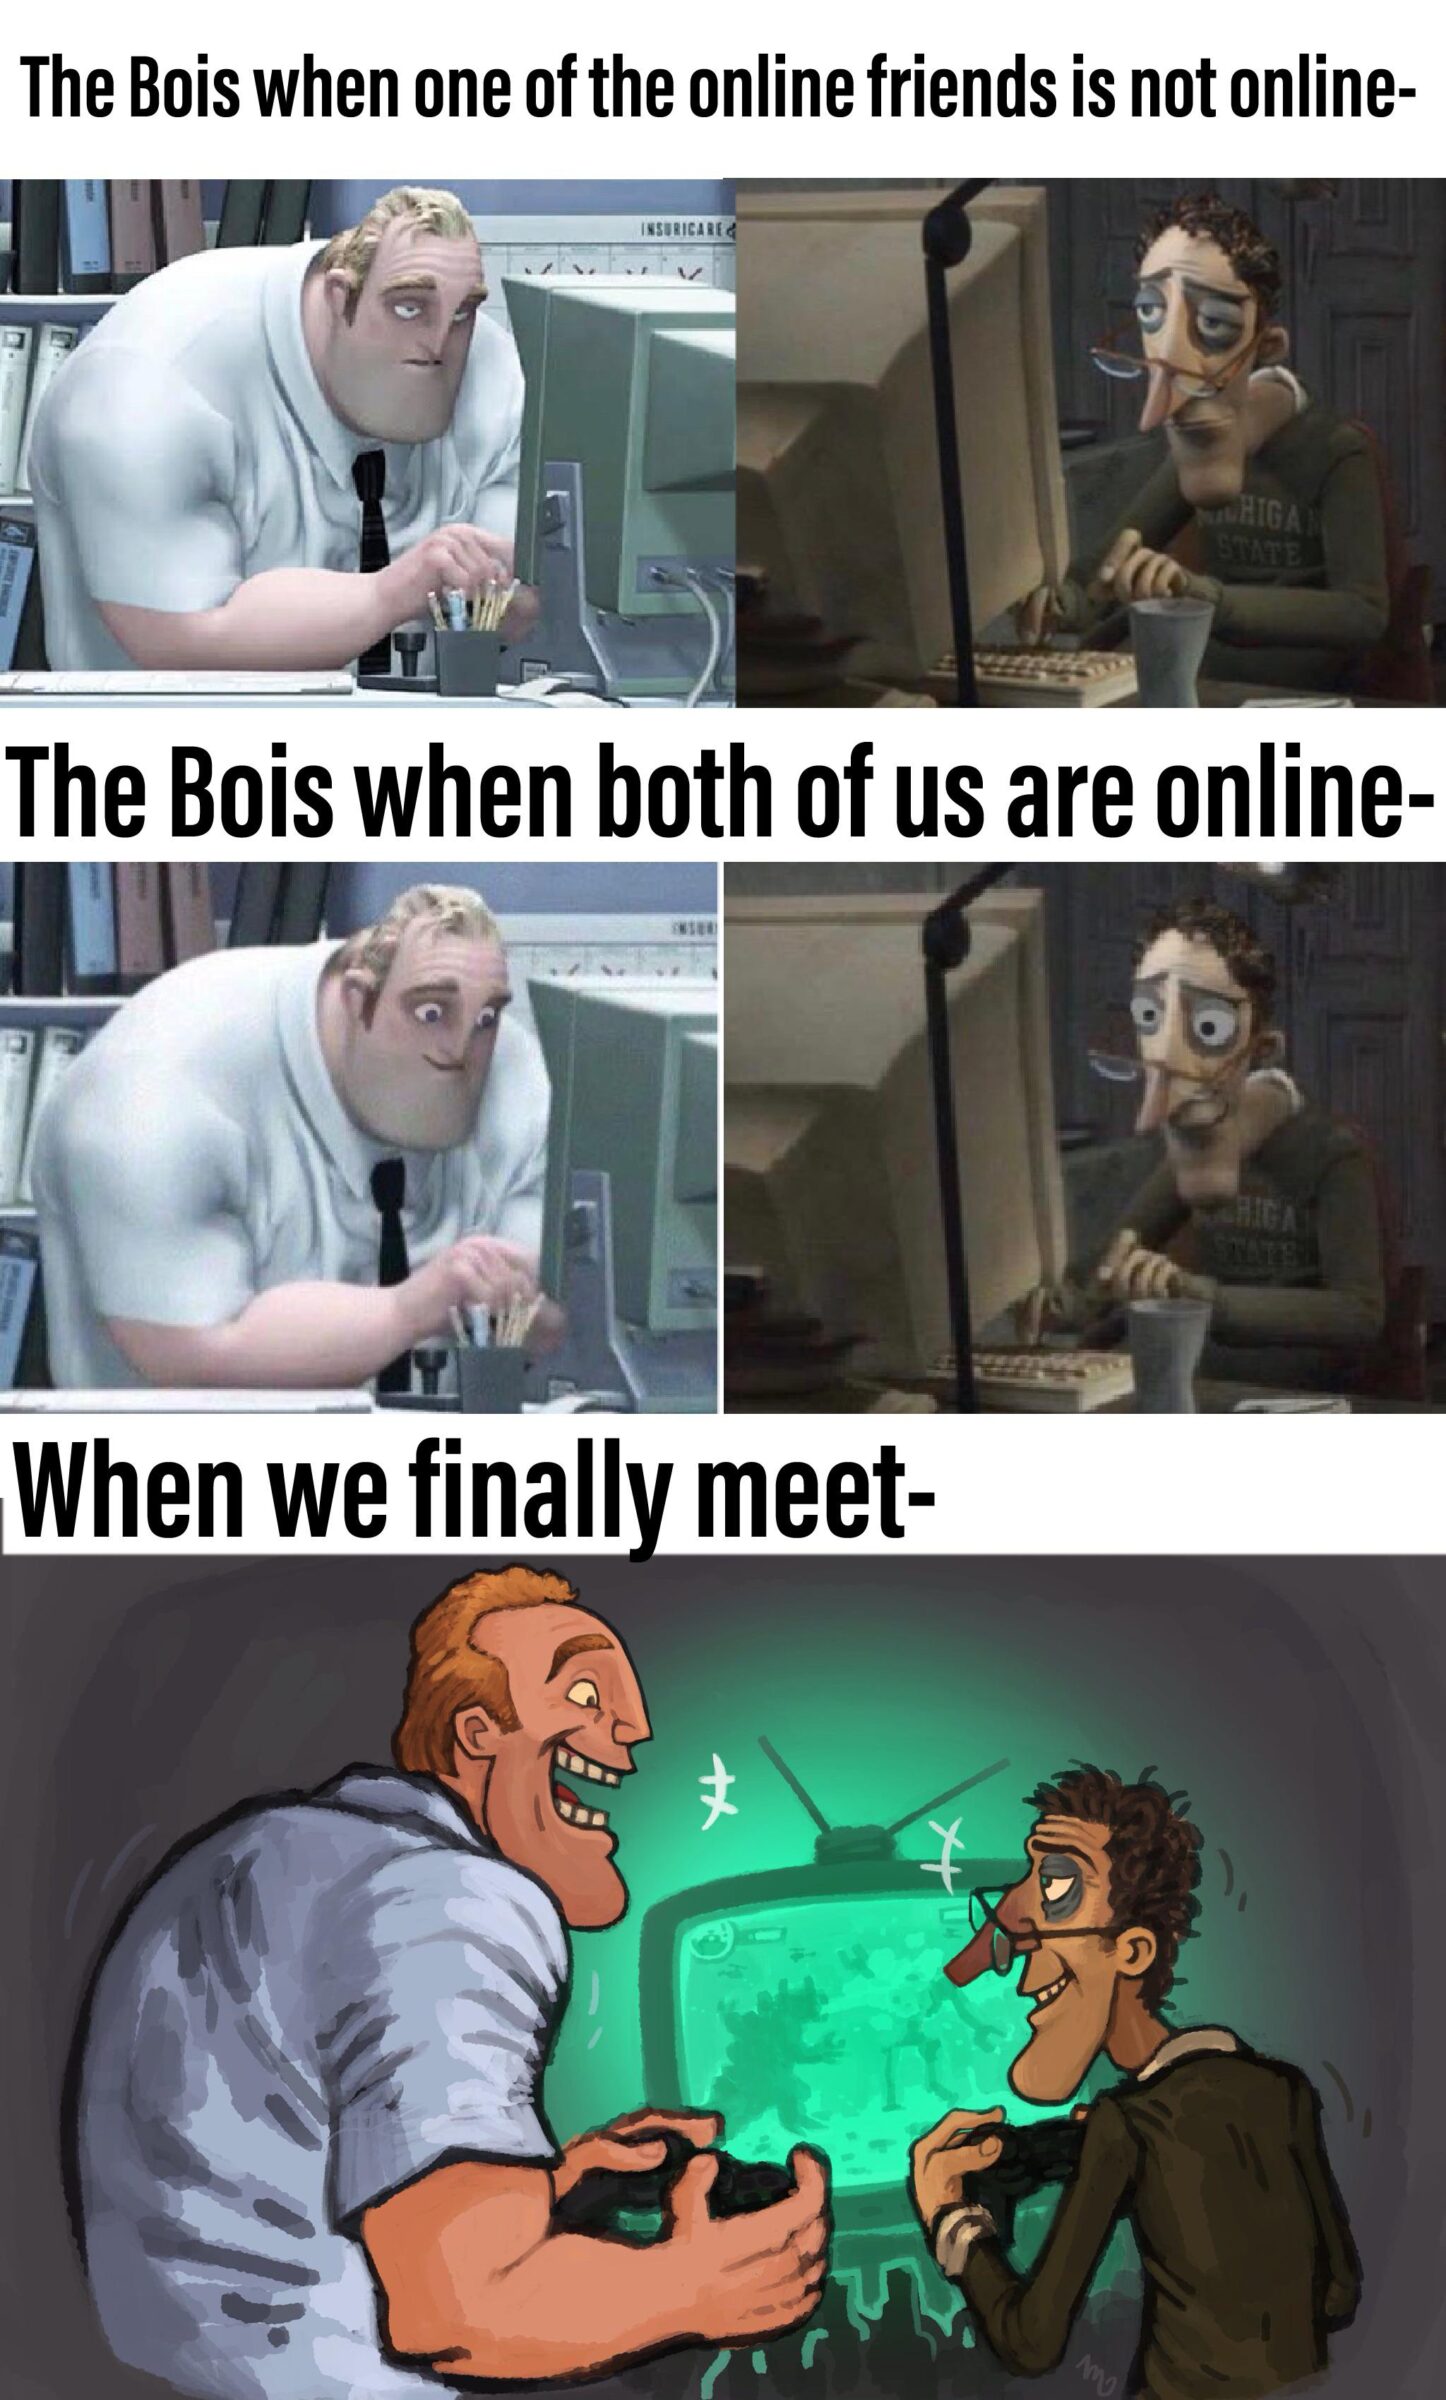 Dank, Tony Dank Memes Dank, Tony text: The Bois when one of the online friends is not online- The Bois when both of us are online- When we finall meet- 